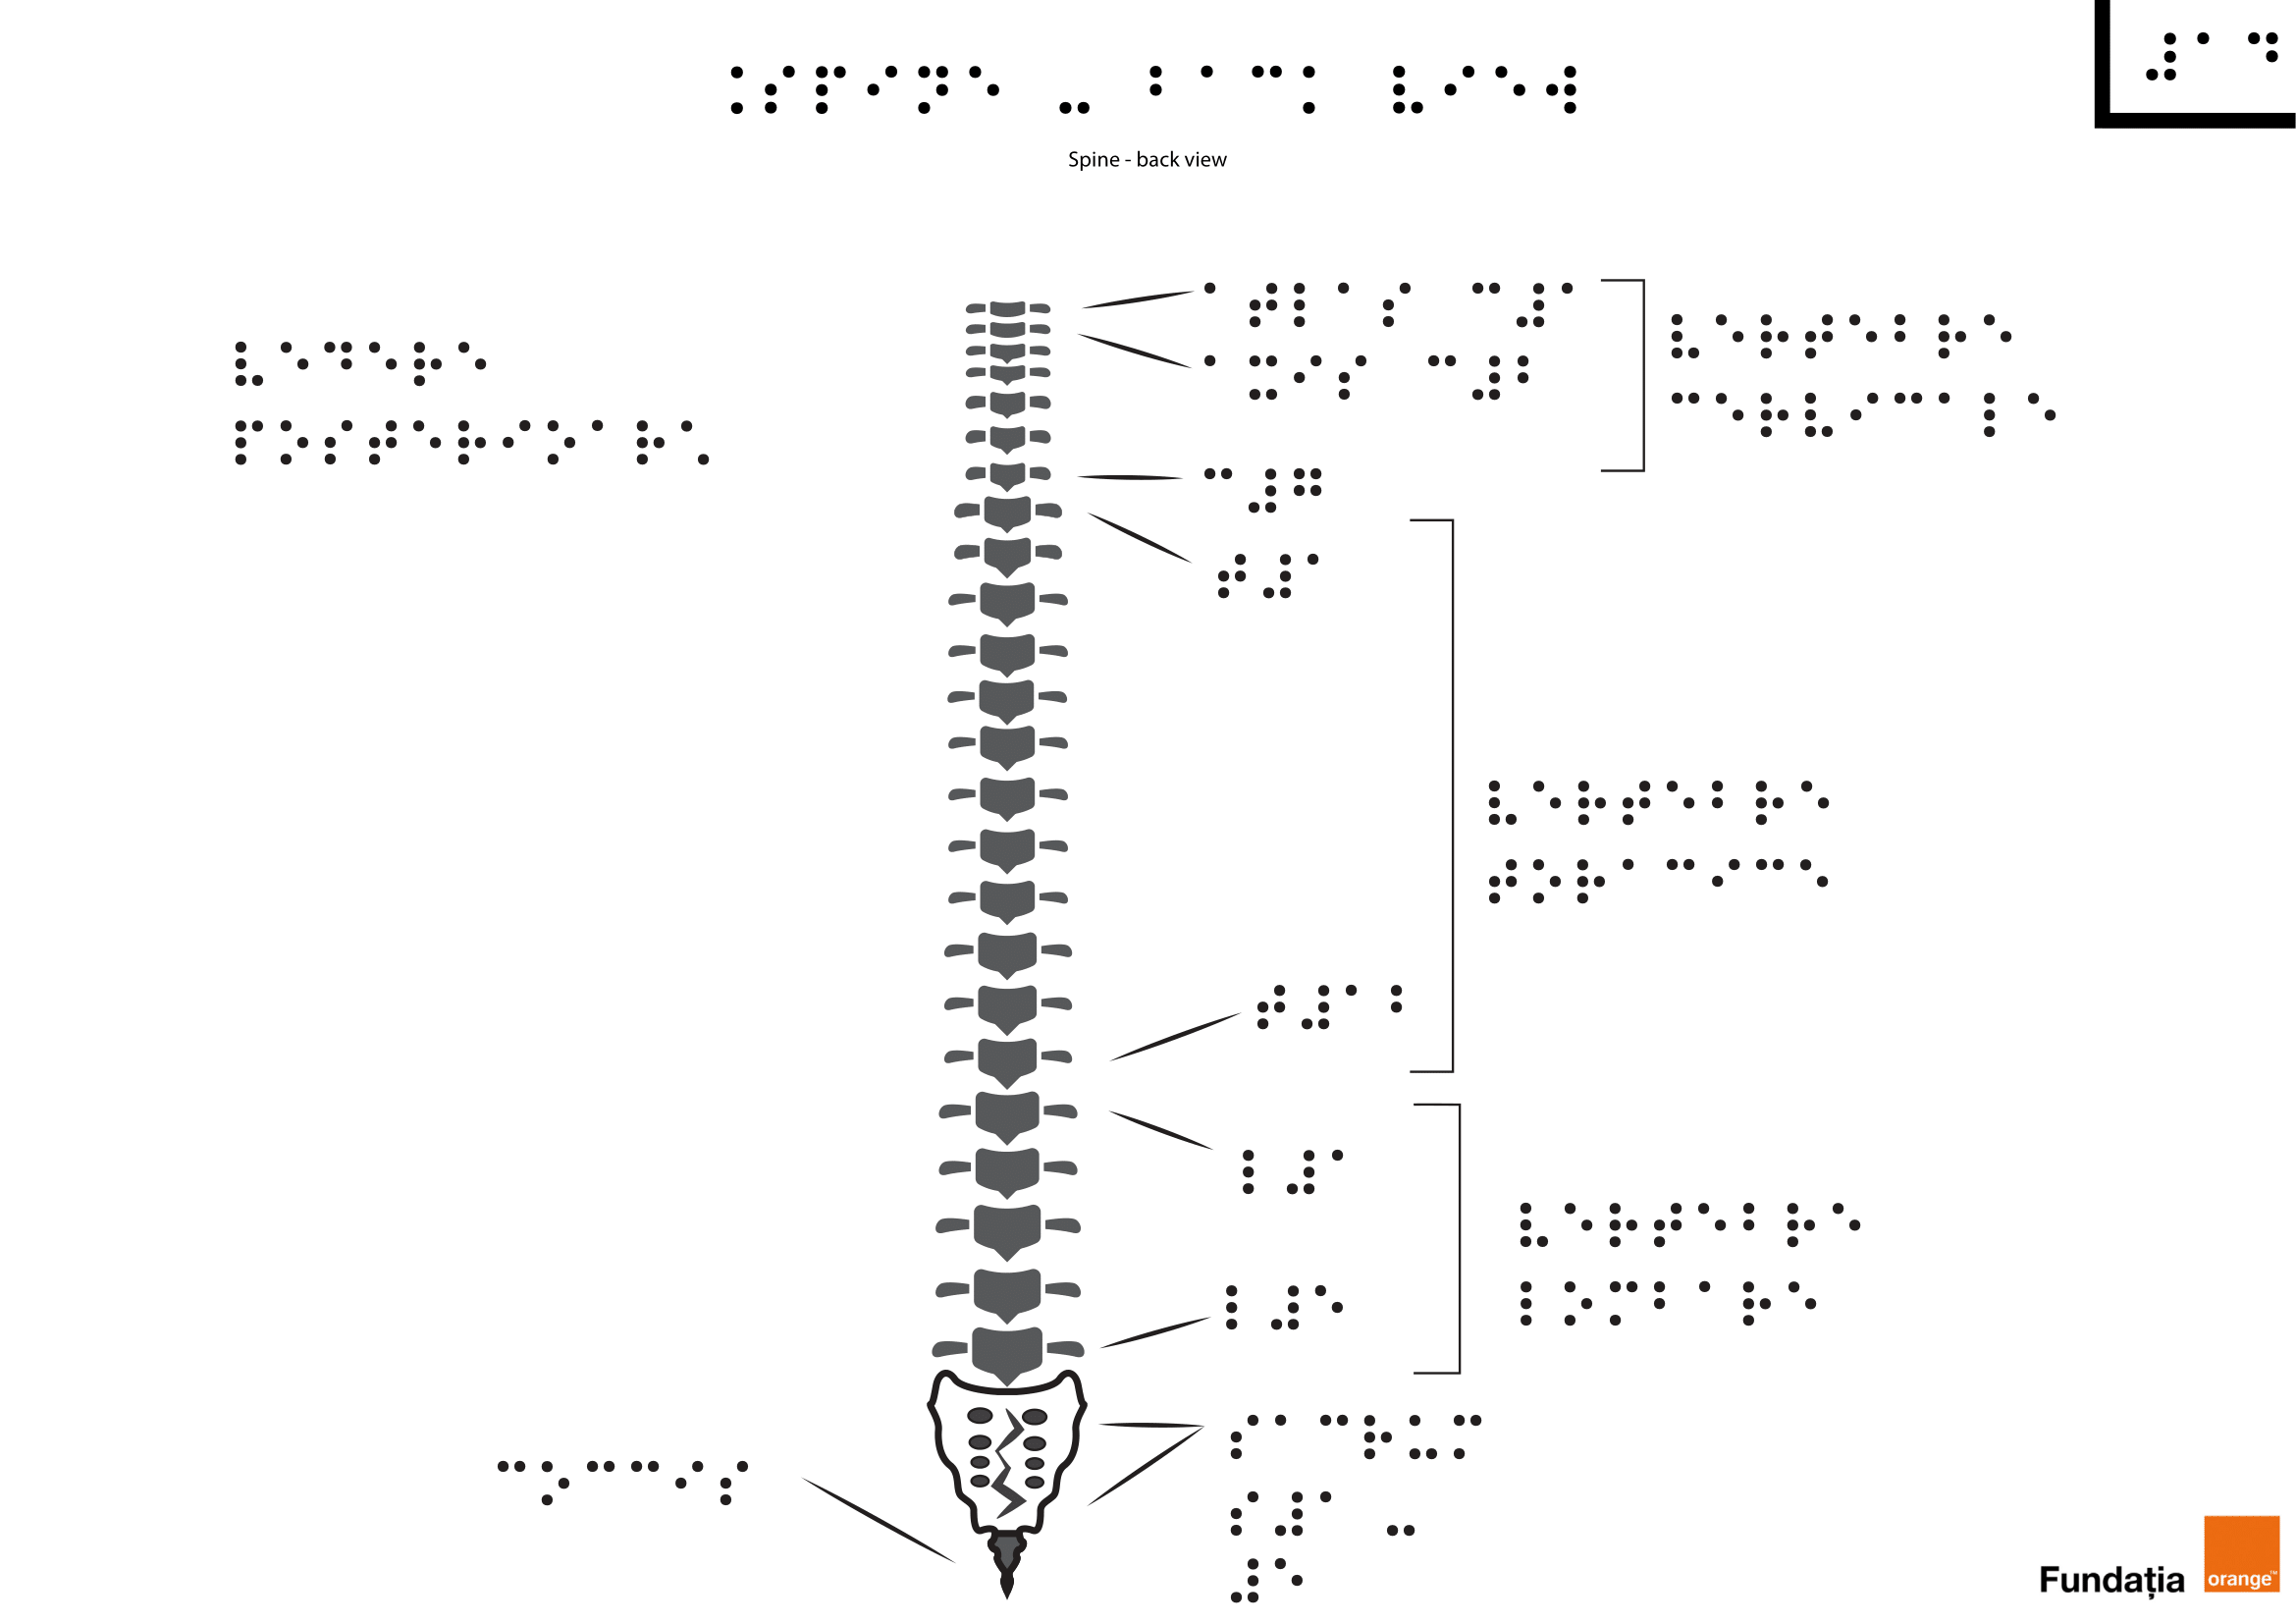 Spine – back view